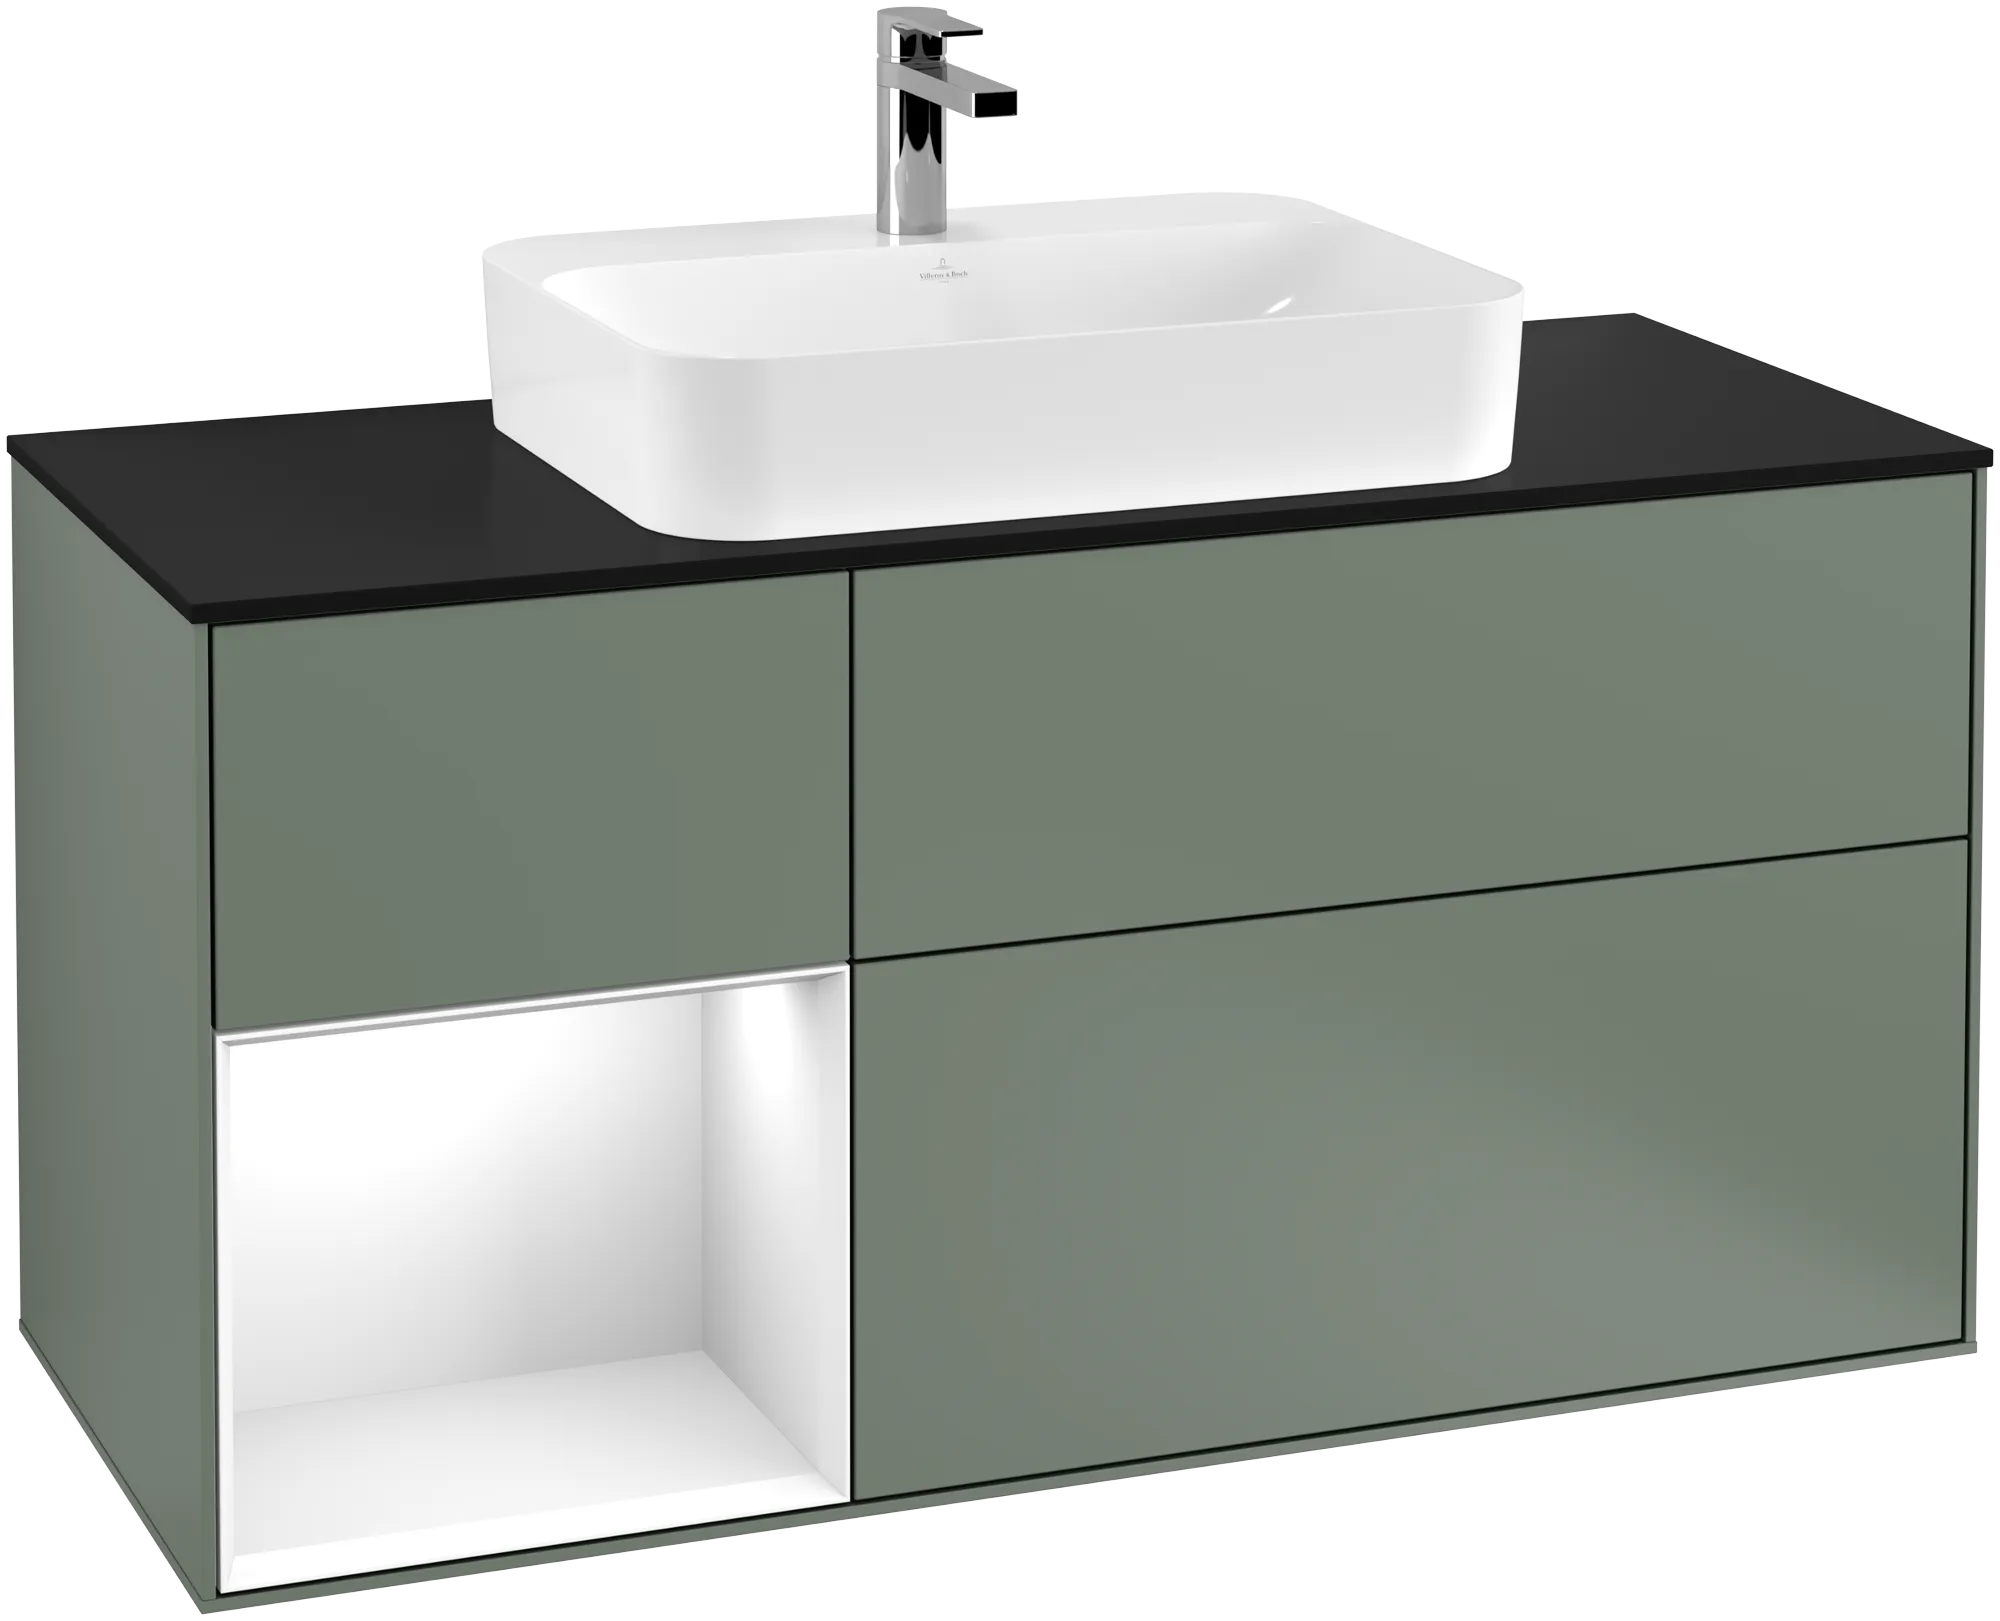 Picture of VILLEROY BOCH Finion Vanity unit, with lighting, 3 pull-out compartments, 1200 x 603 x 501 mm, Olive Matt Lacquer / Glossy White Lacquer / Glass Black Matt #G412GFGM